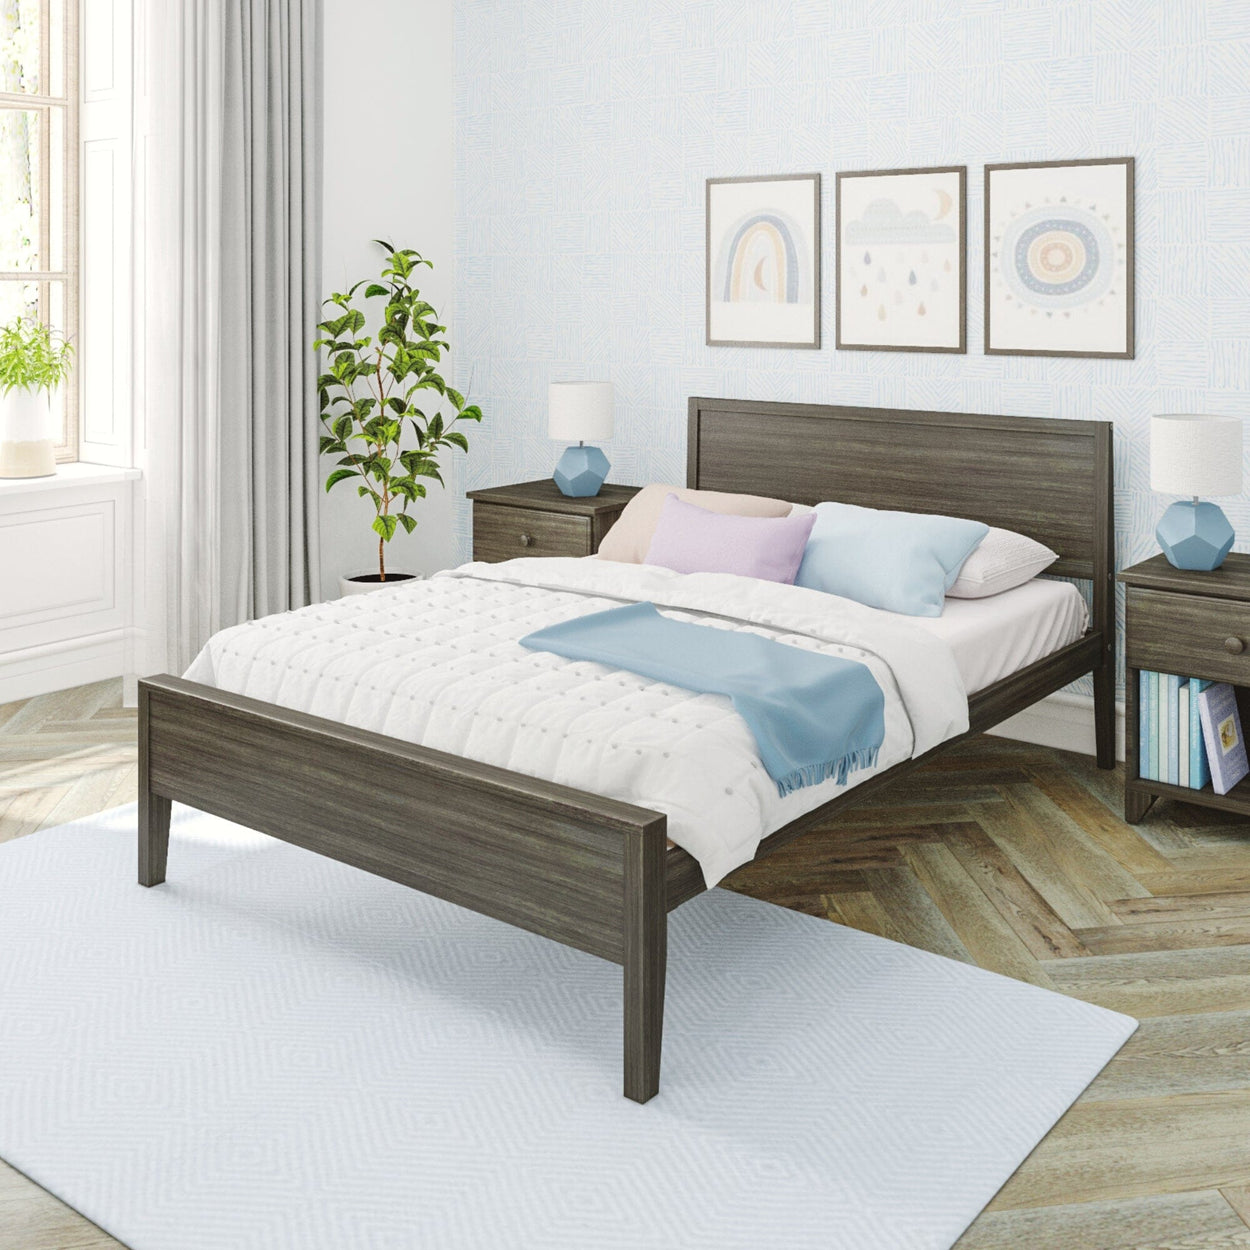 181101-151 : Kids Beds Classic Full-Size Bed with Panel Headboard, Clay